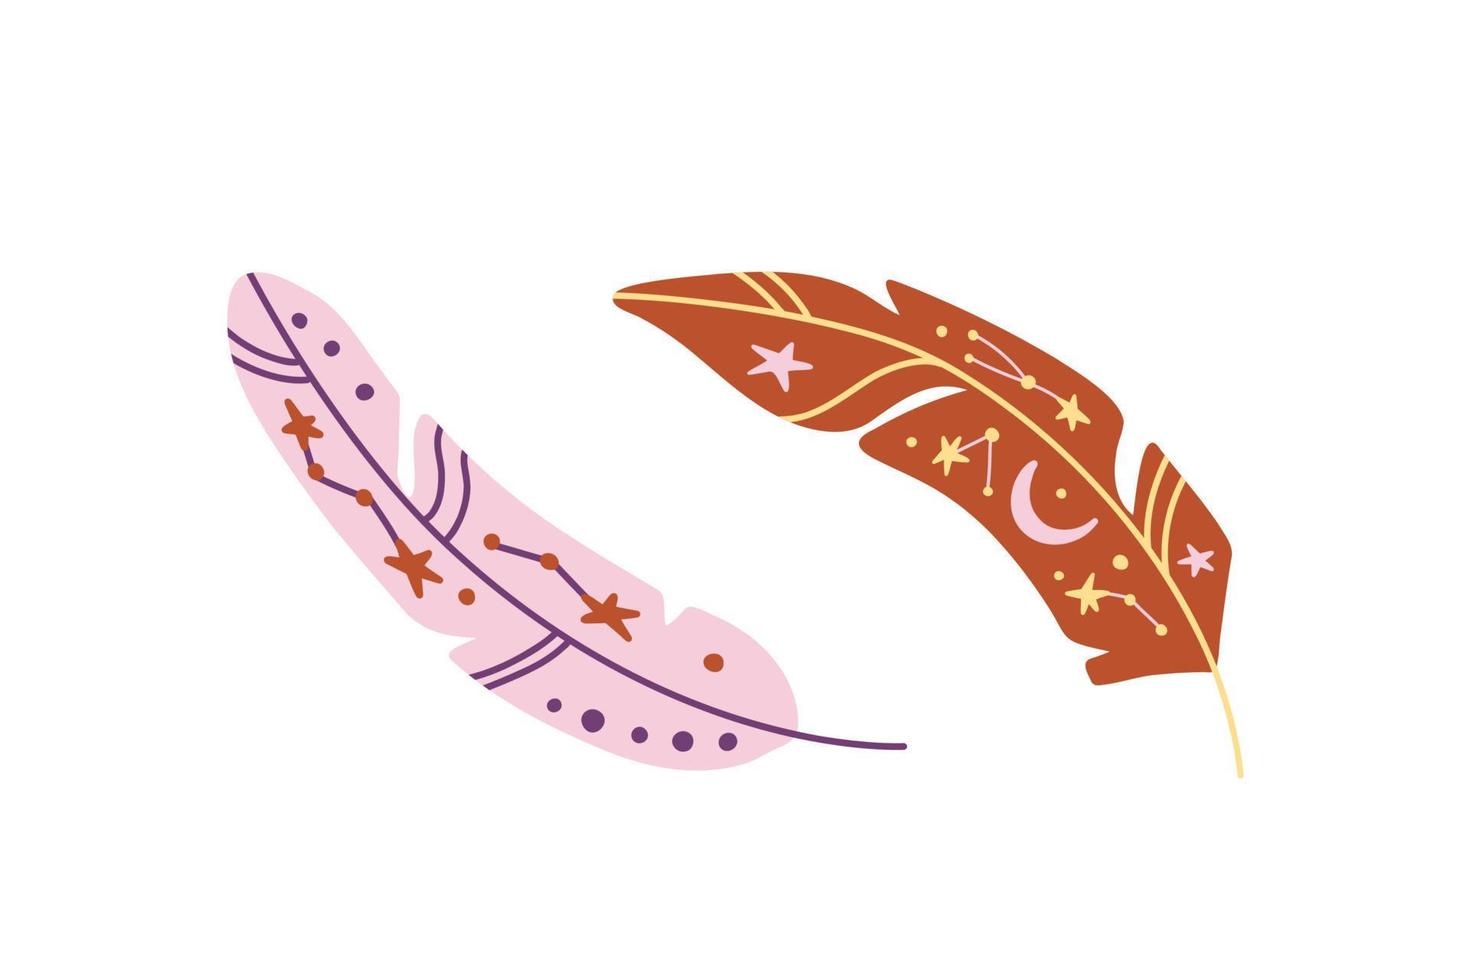 Feathers hand drawn set illustration. Moon and stars on feathers vector